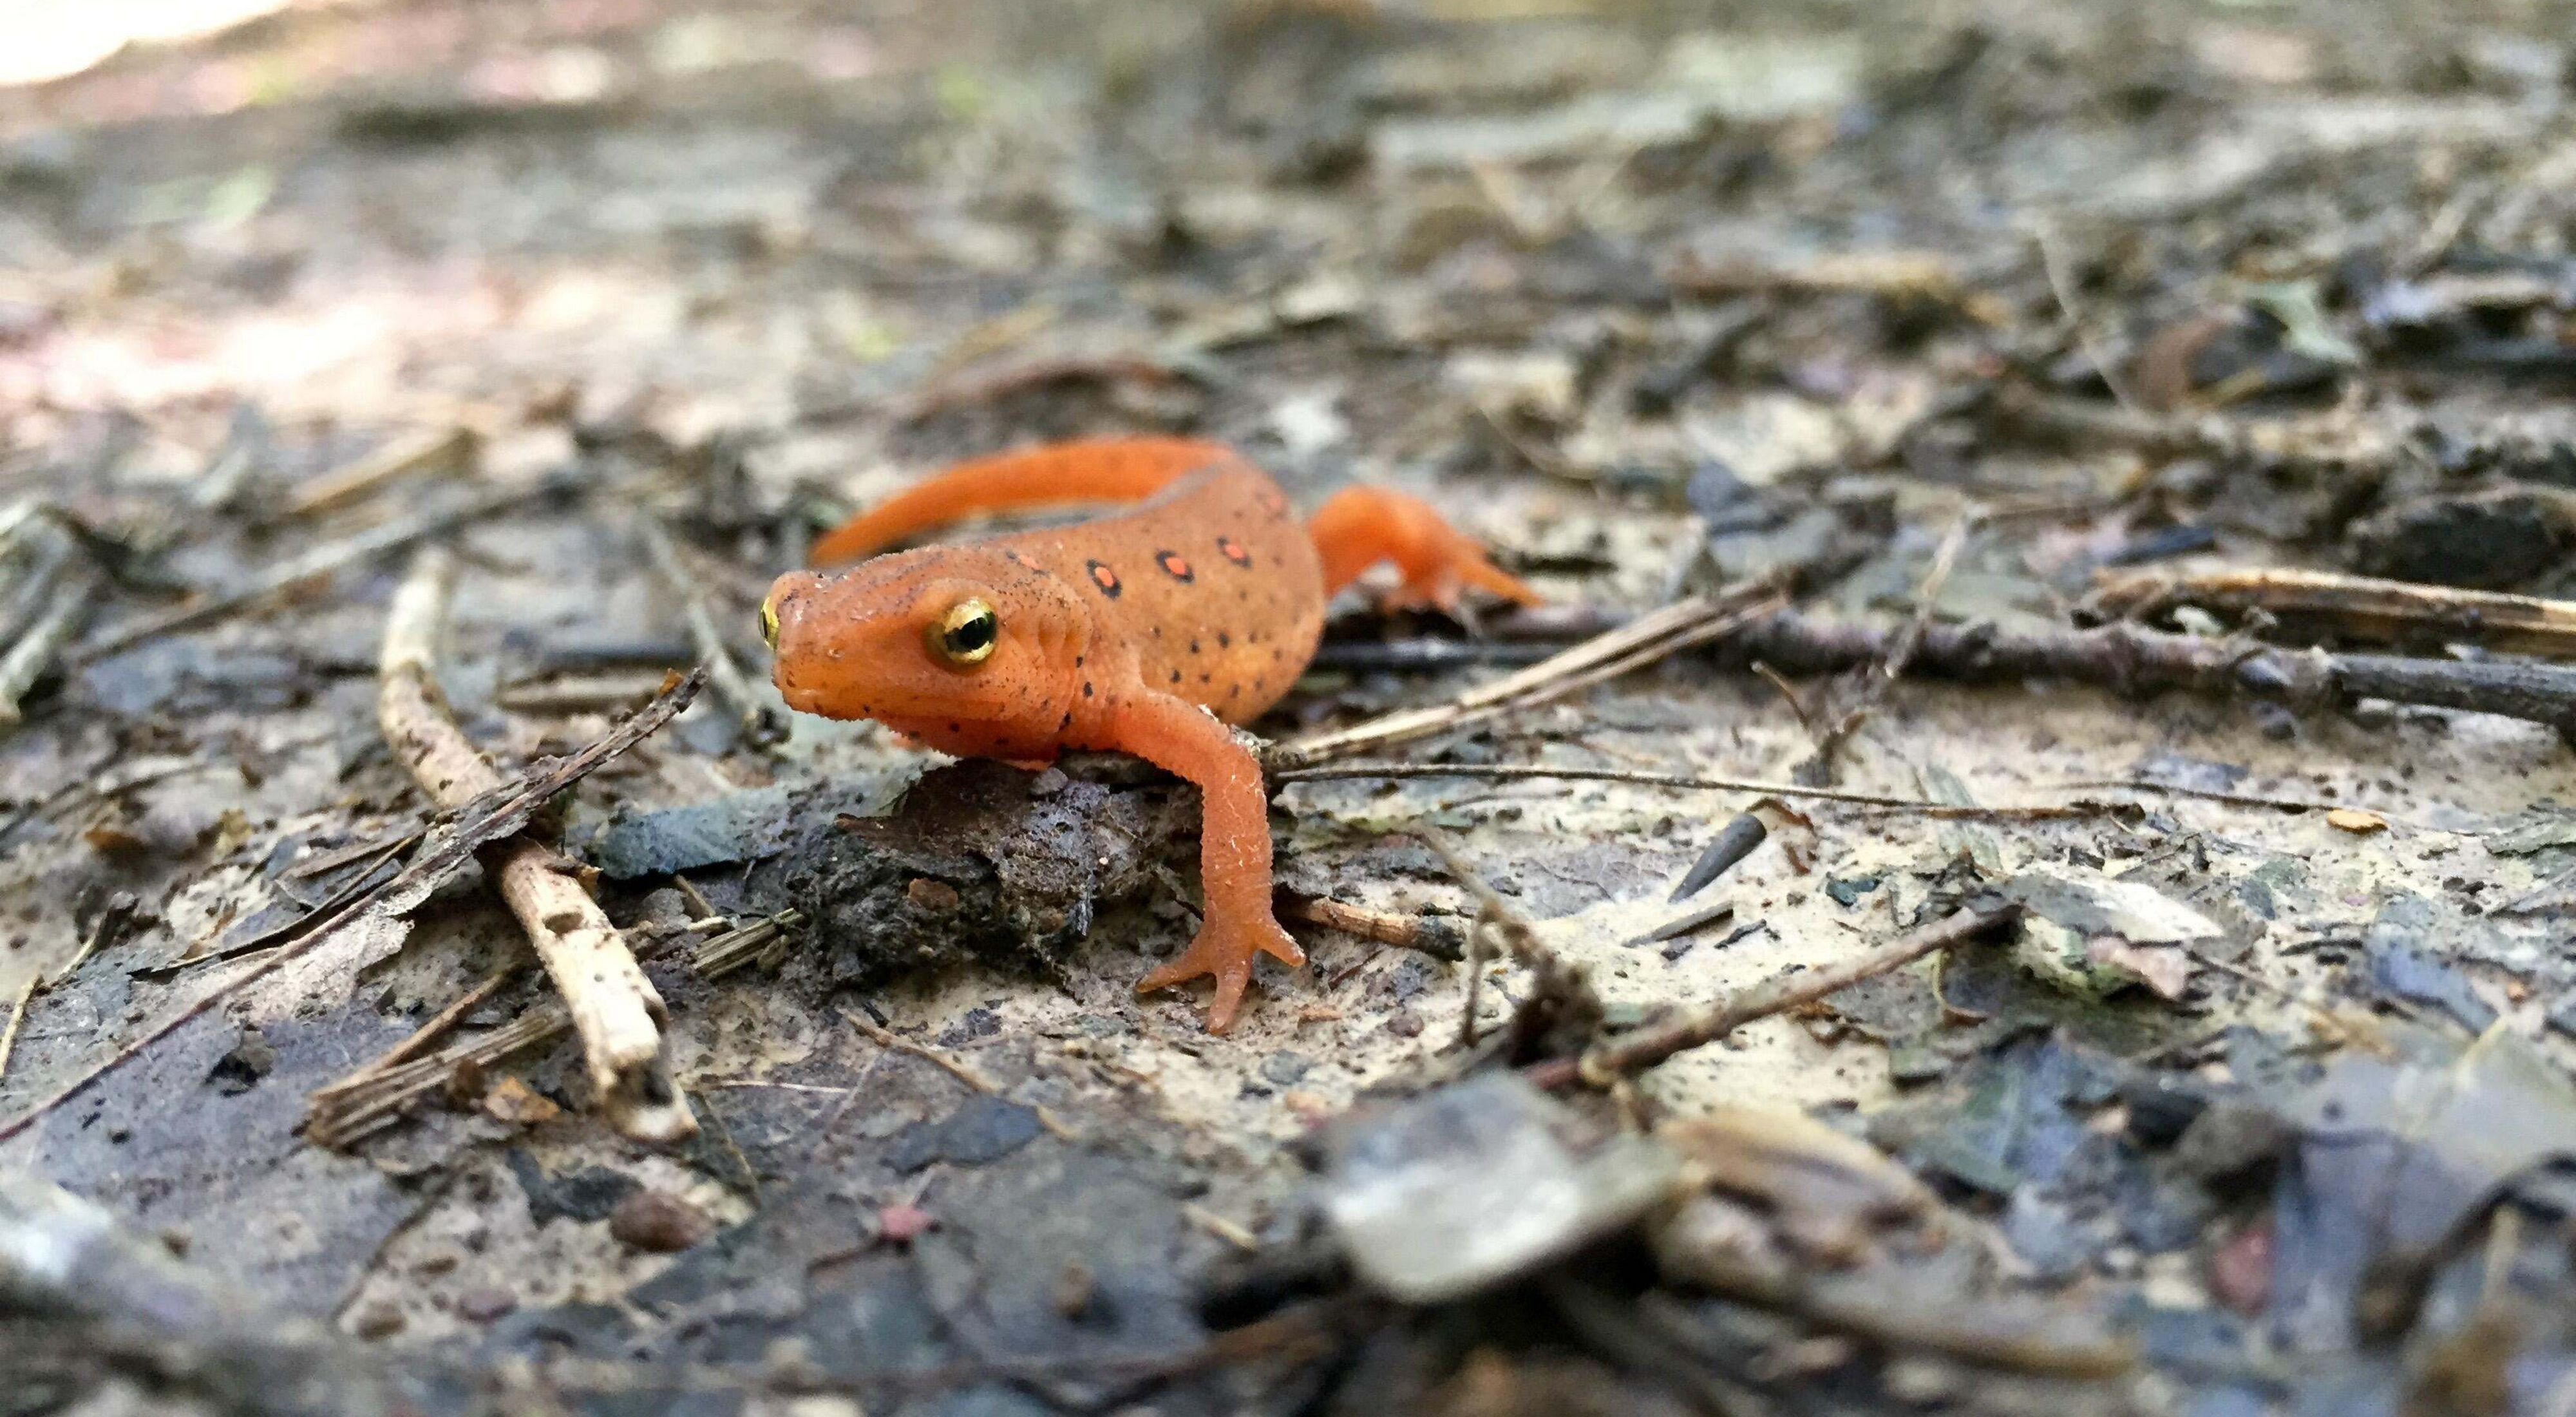 A bright orange salamander moves across a leafy forest floor.